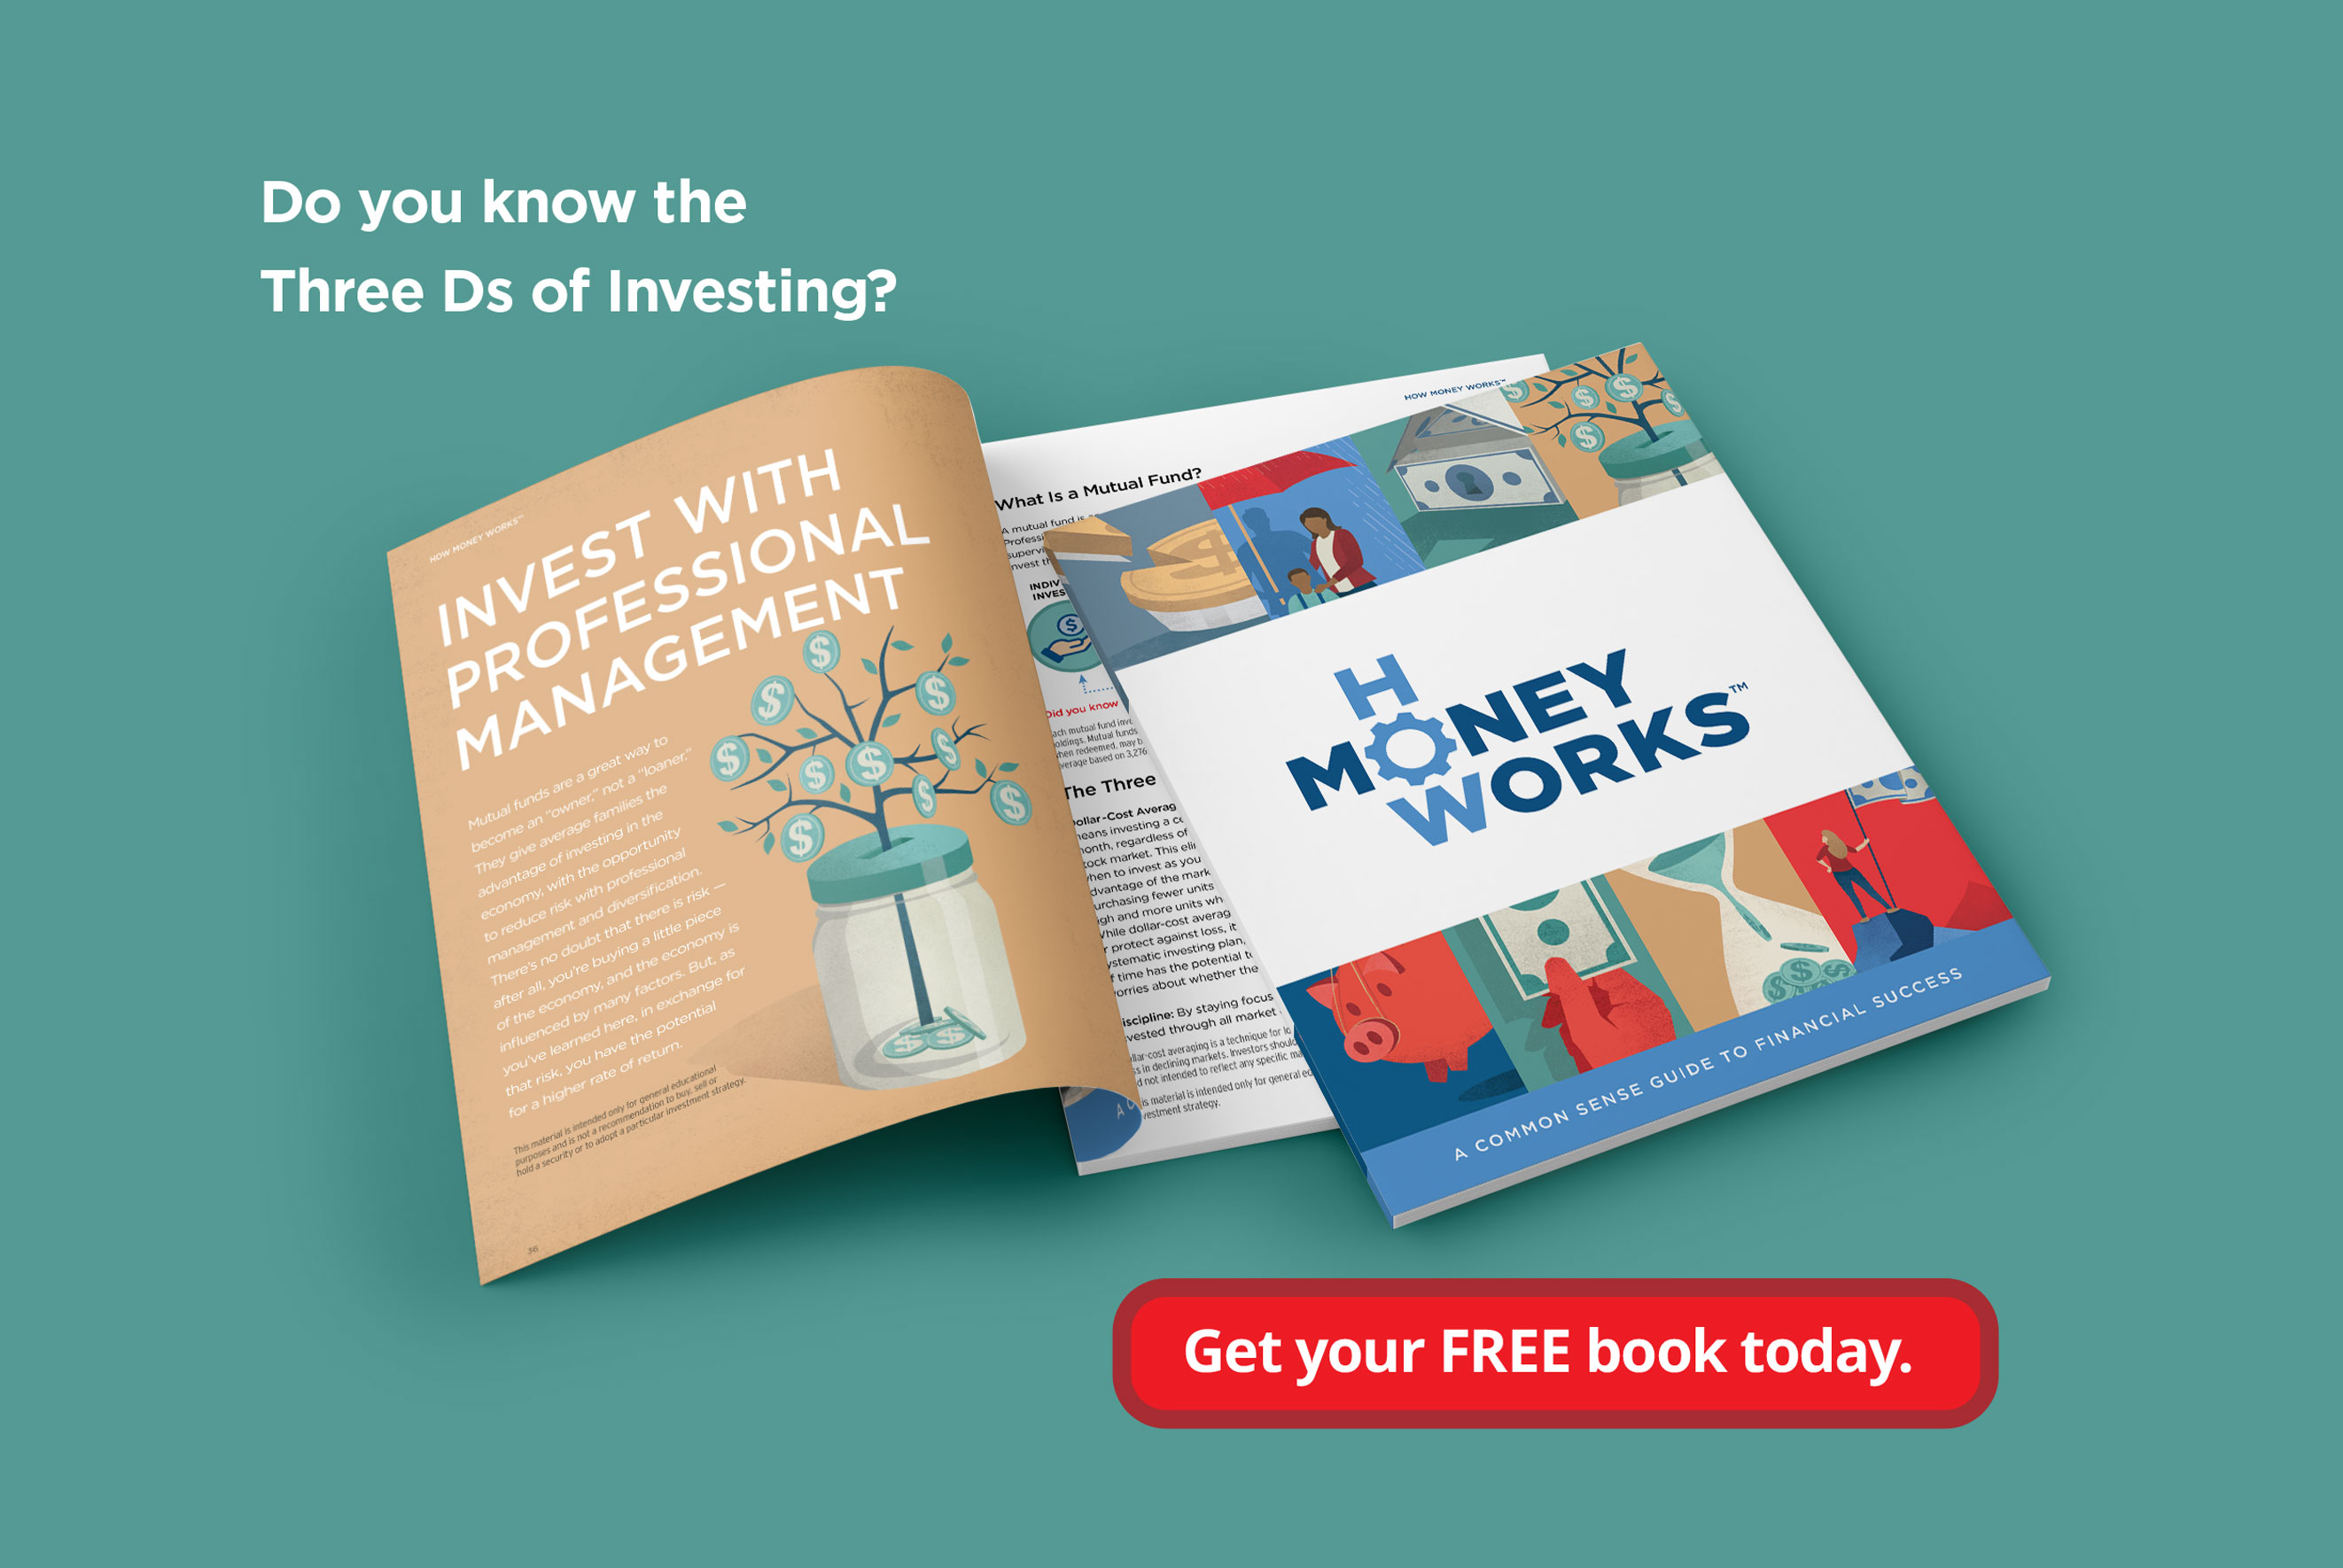 Do you know the Three Ds of Investing? Get Your FREE copy today!